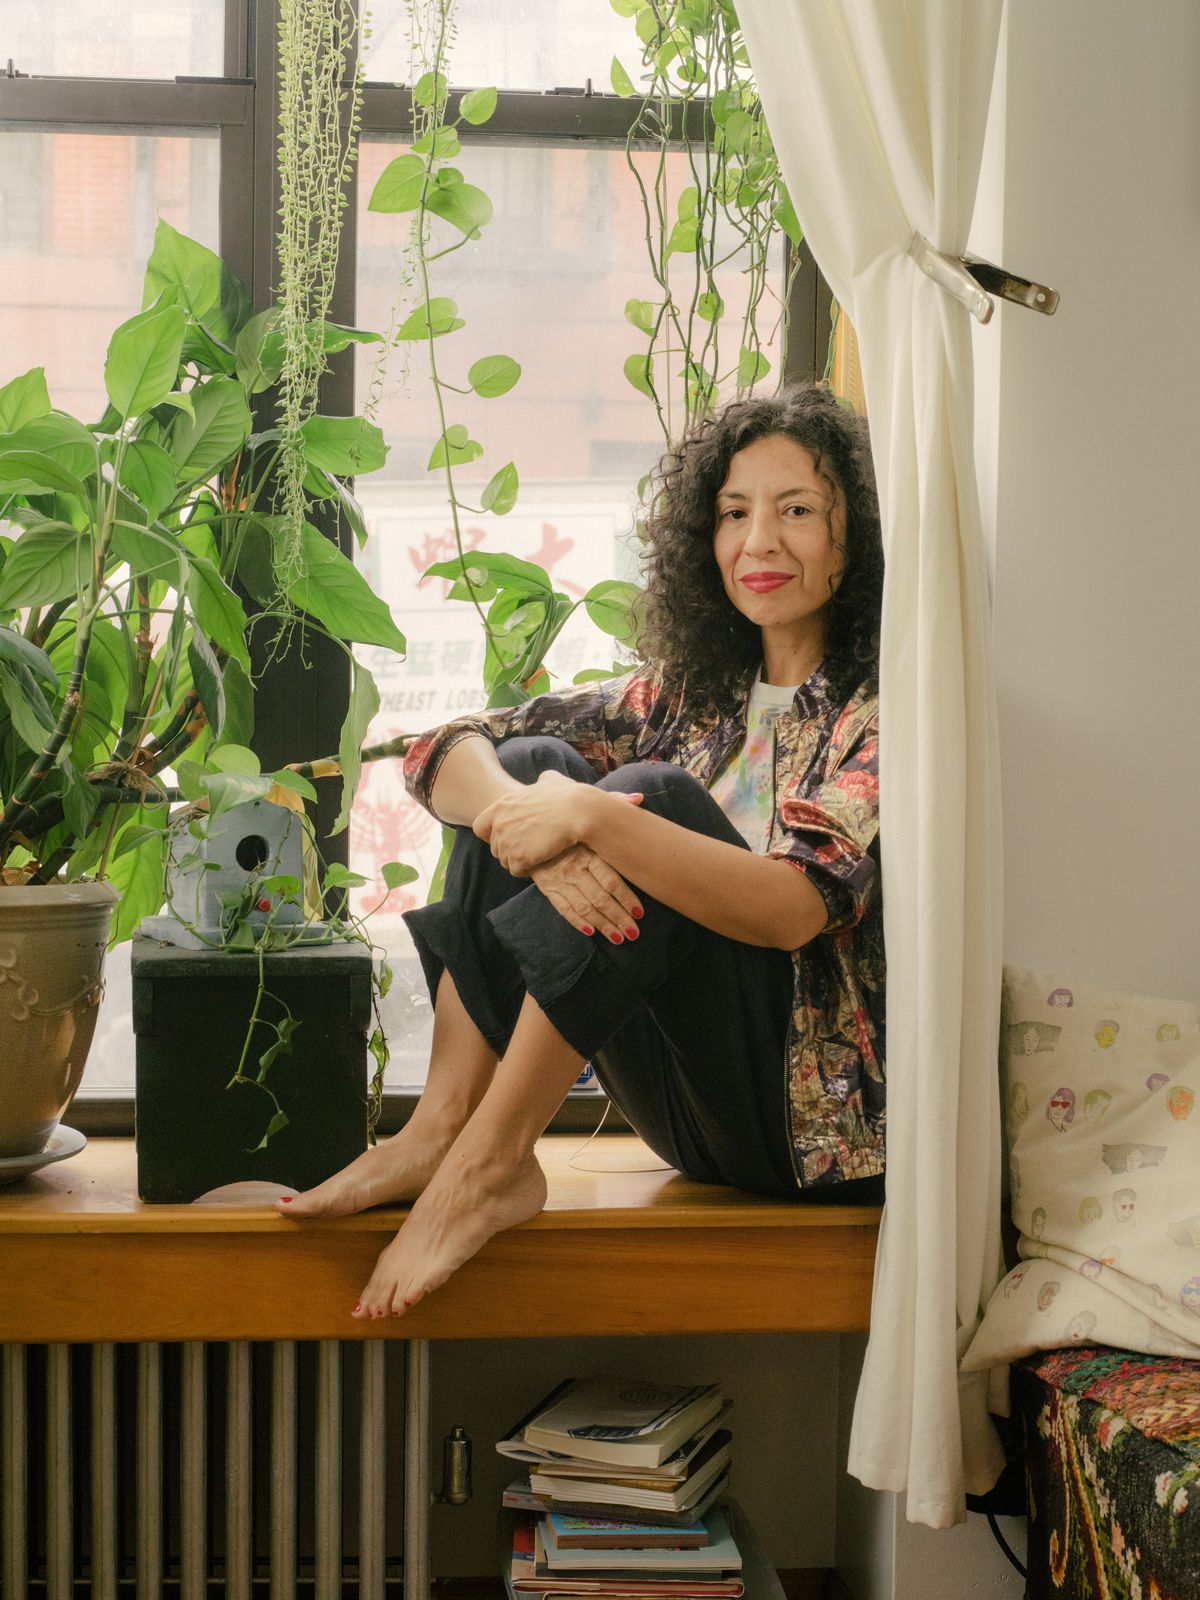 A woman sitting on a shelf over a radiator in her apartment window surrounded by houseplants.